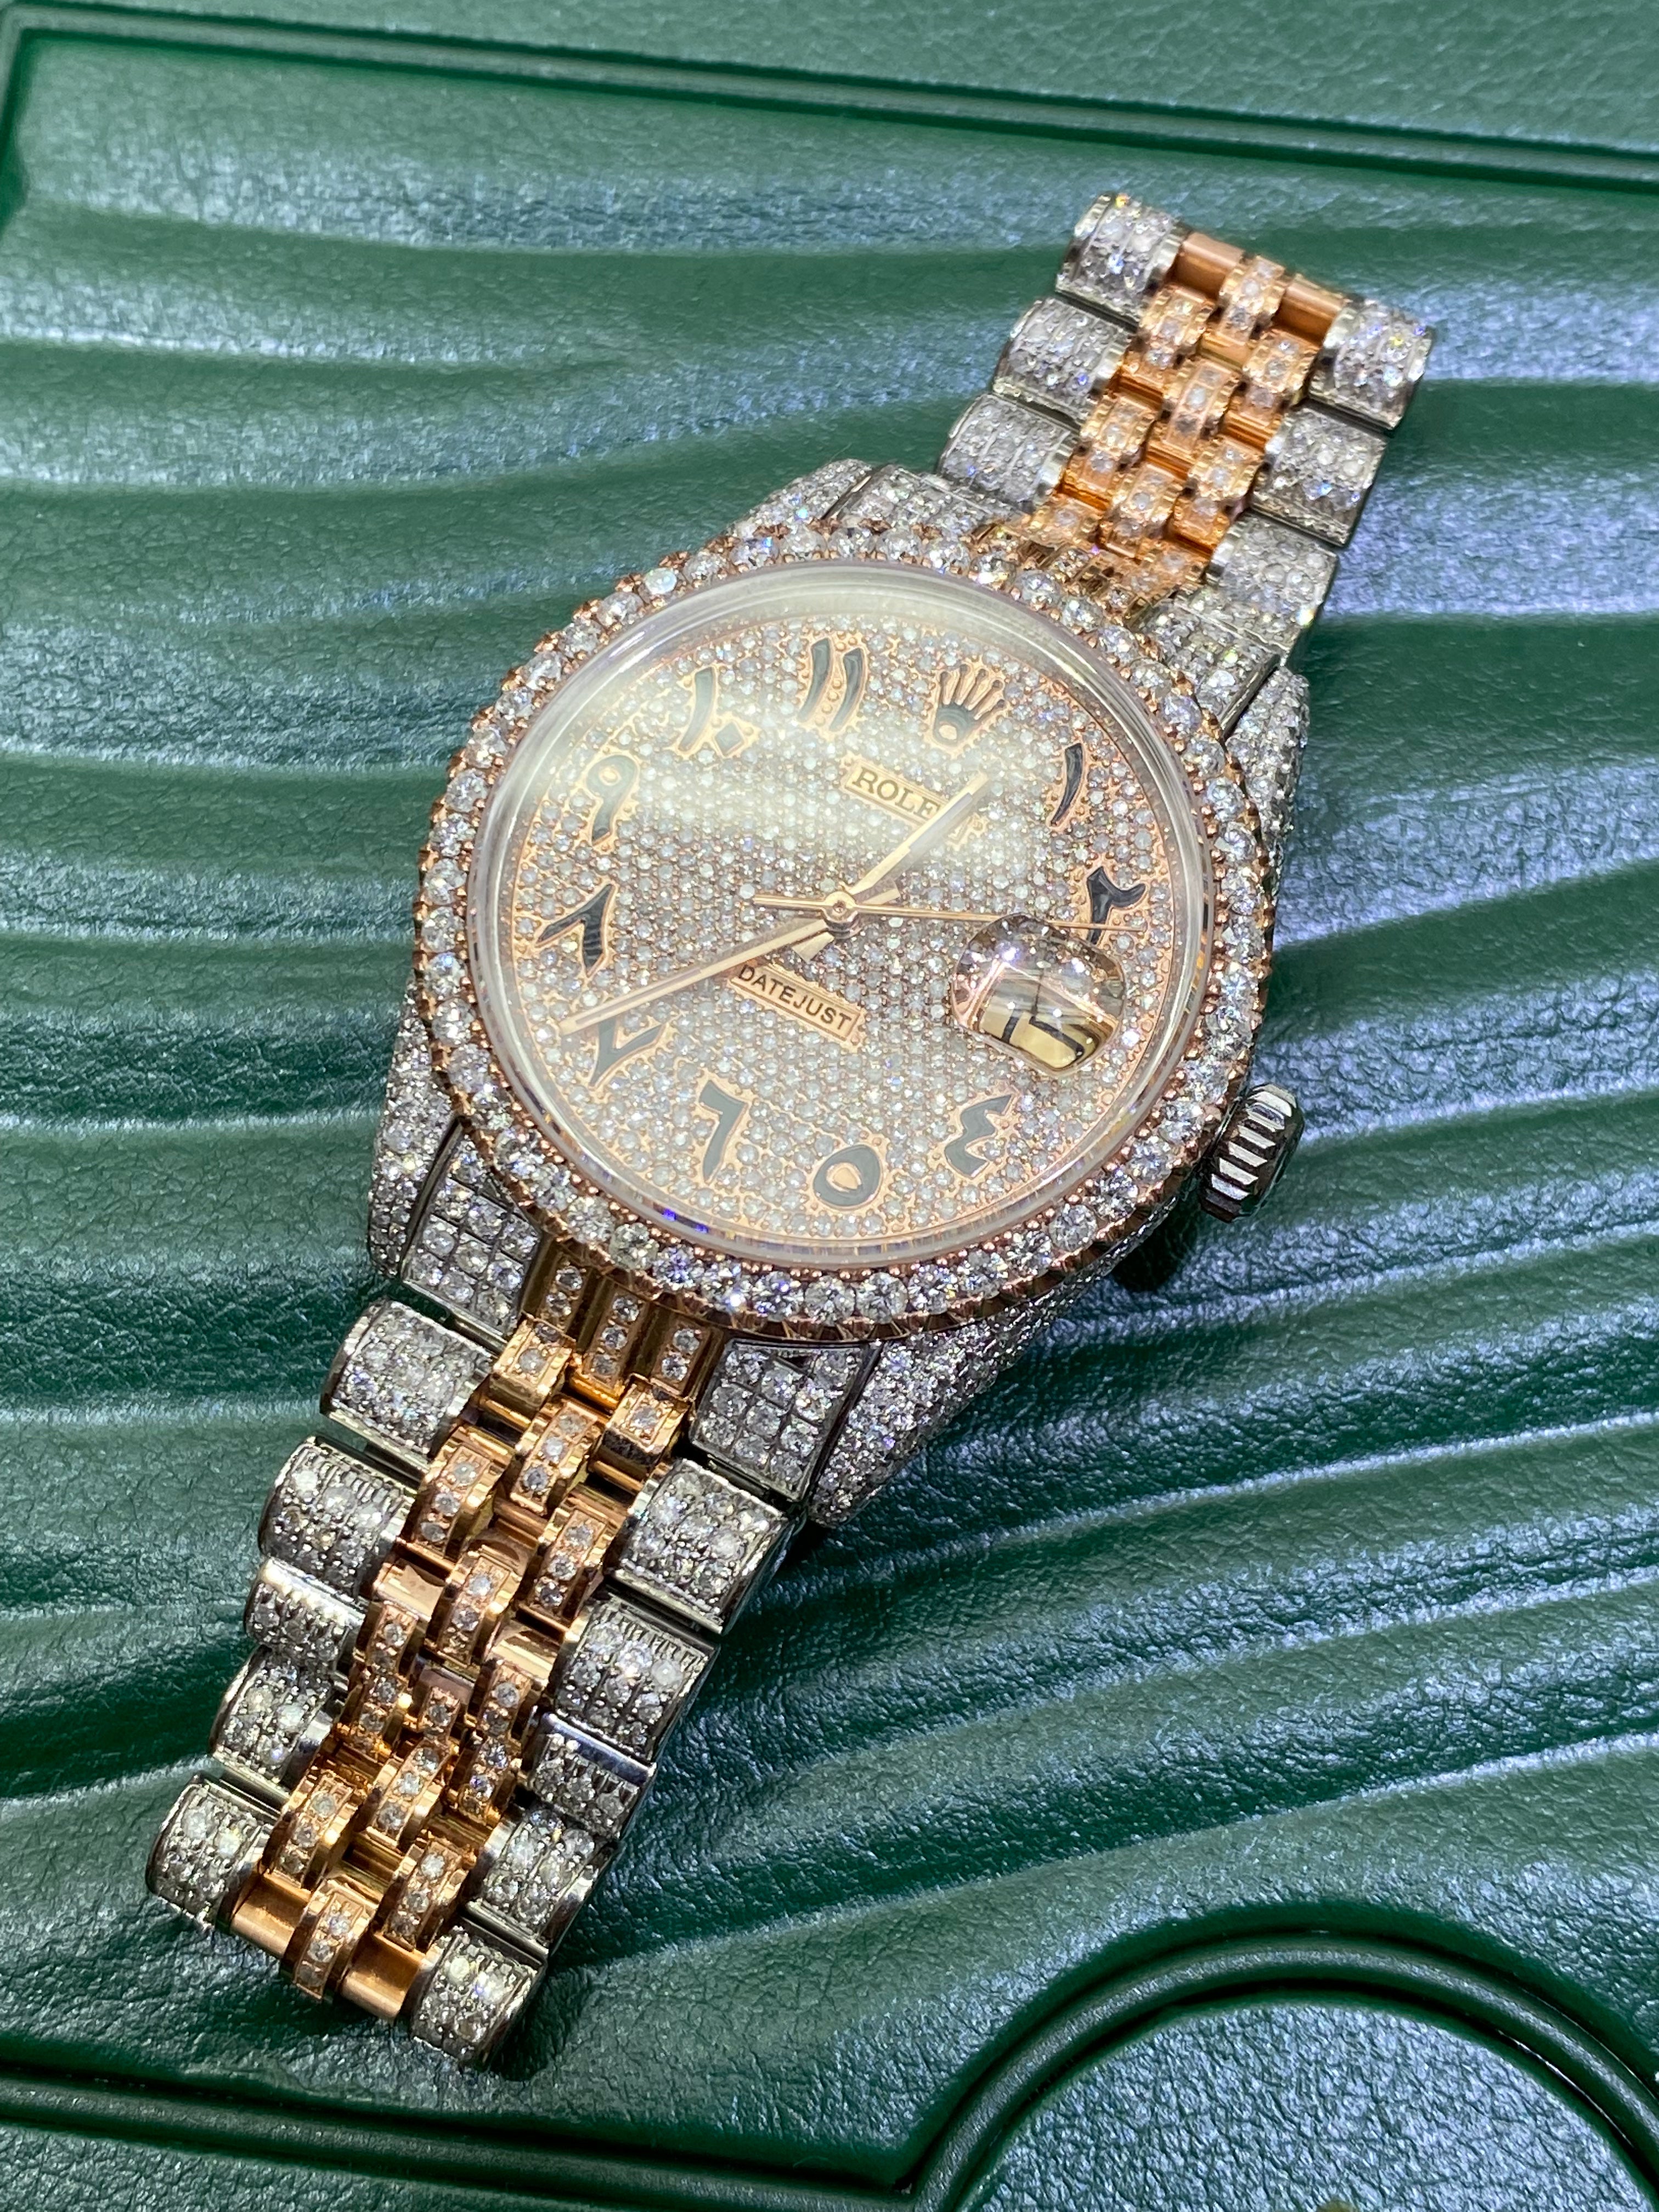 Bust Down rolex with diamonds